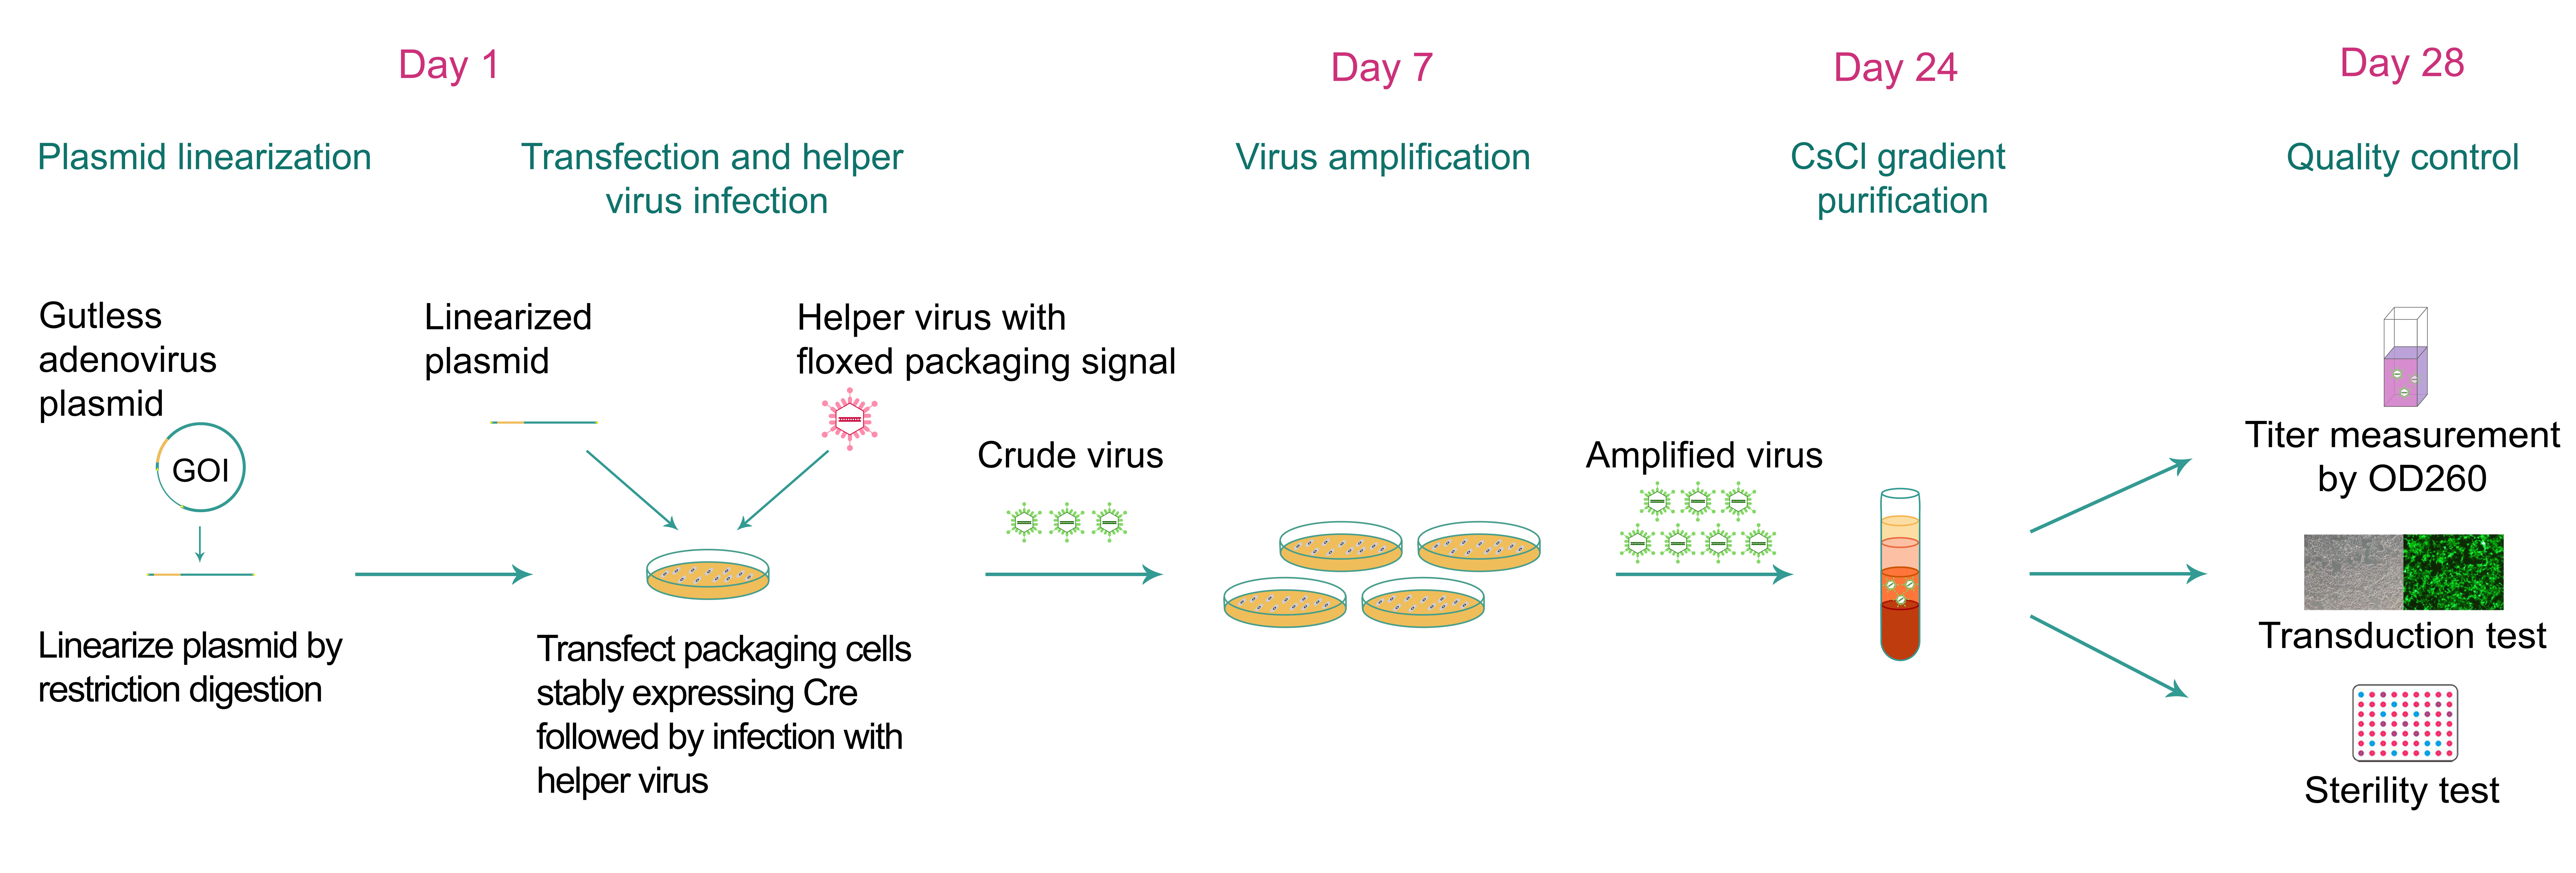 Typical workflow of gutless adenovirus packaging and quality control.